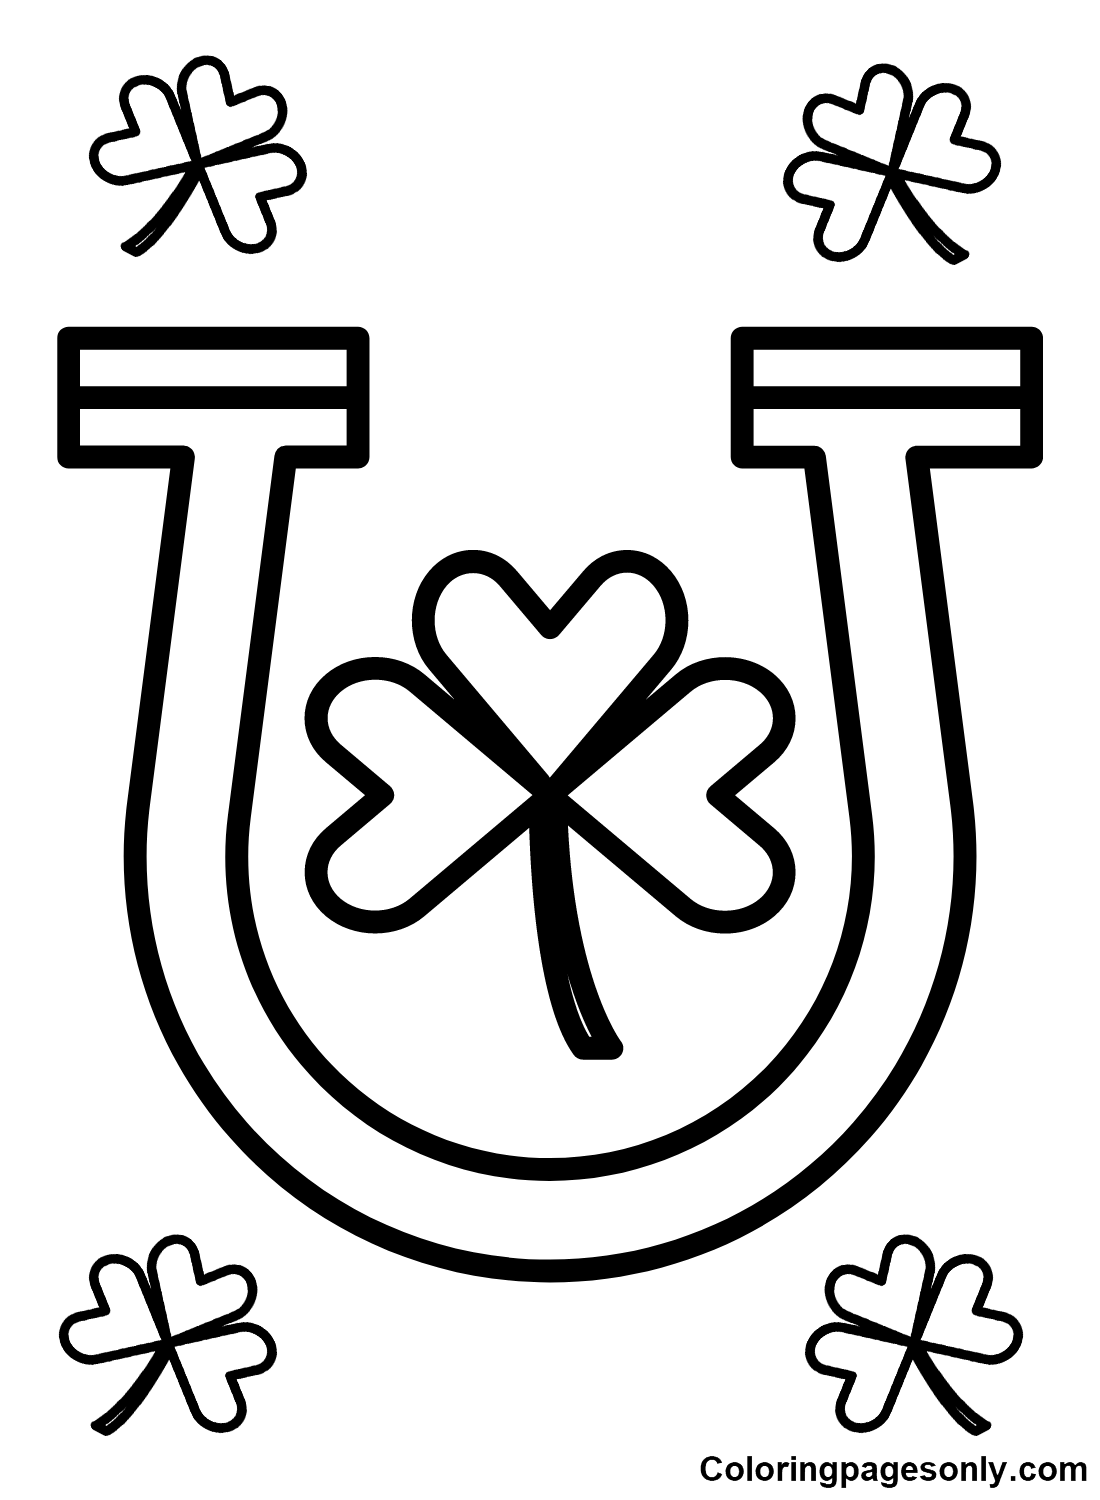 Horseshoe with Shamrock Coloring Pages